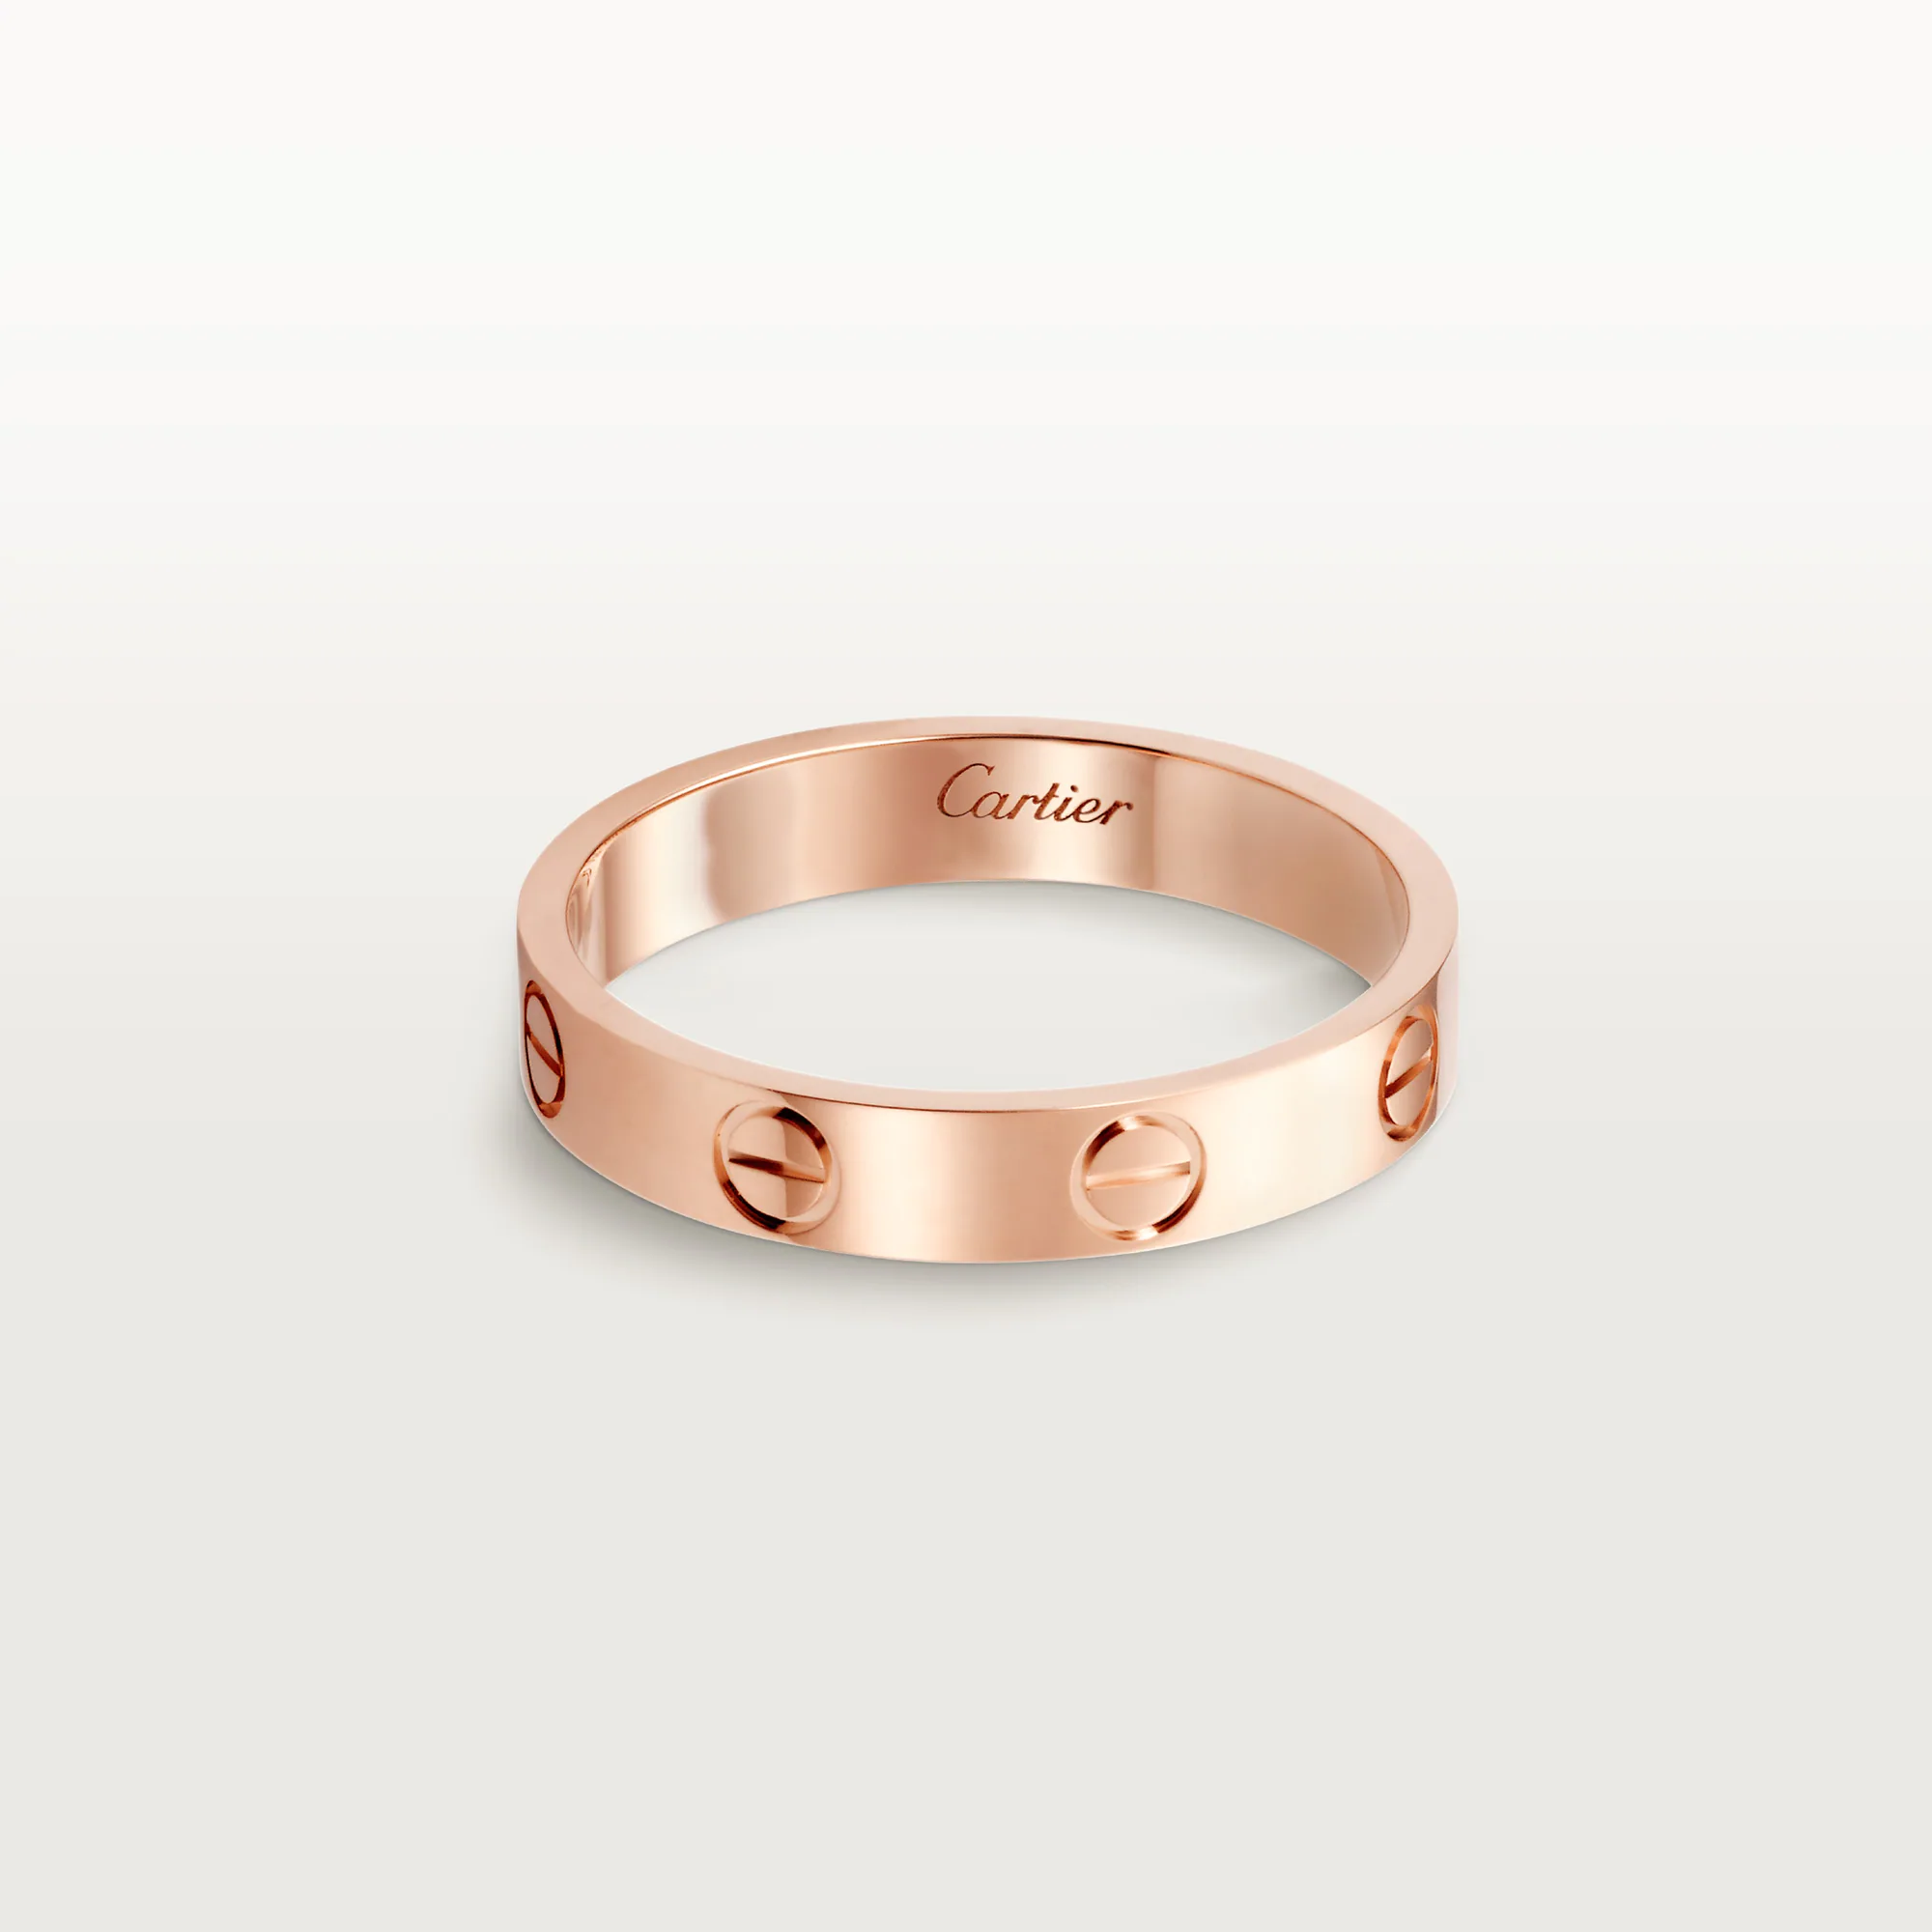 Cartier Thin Love Ring